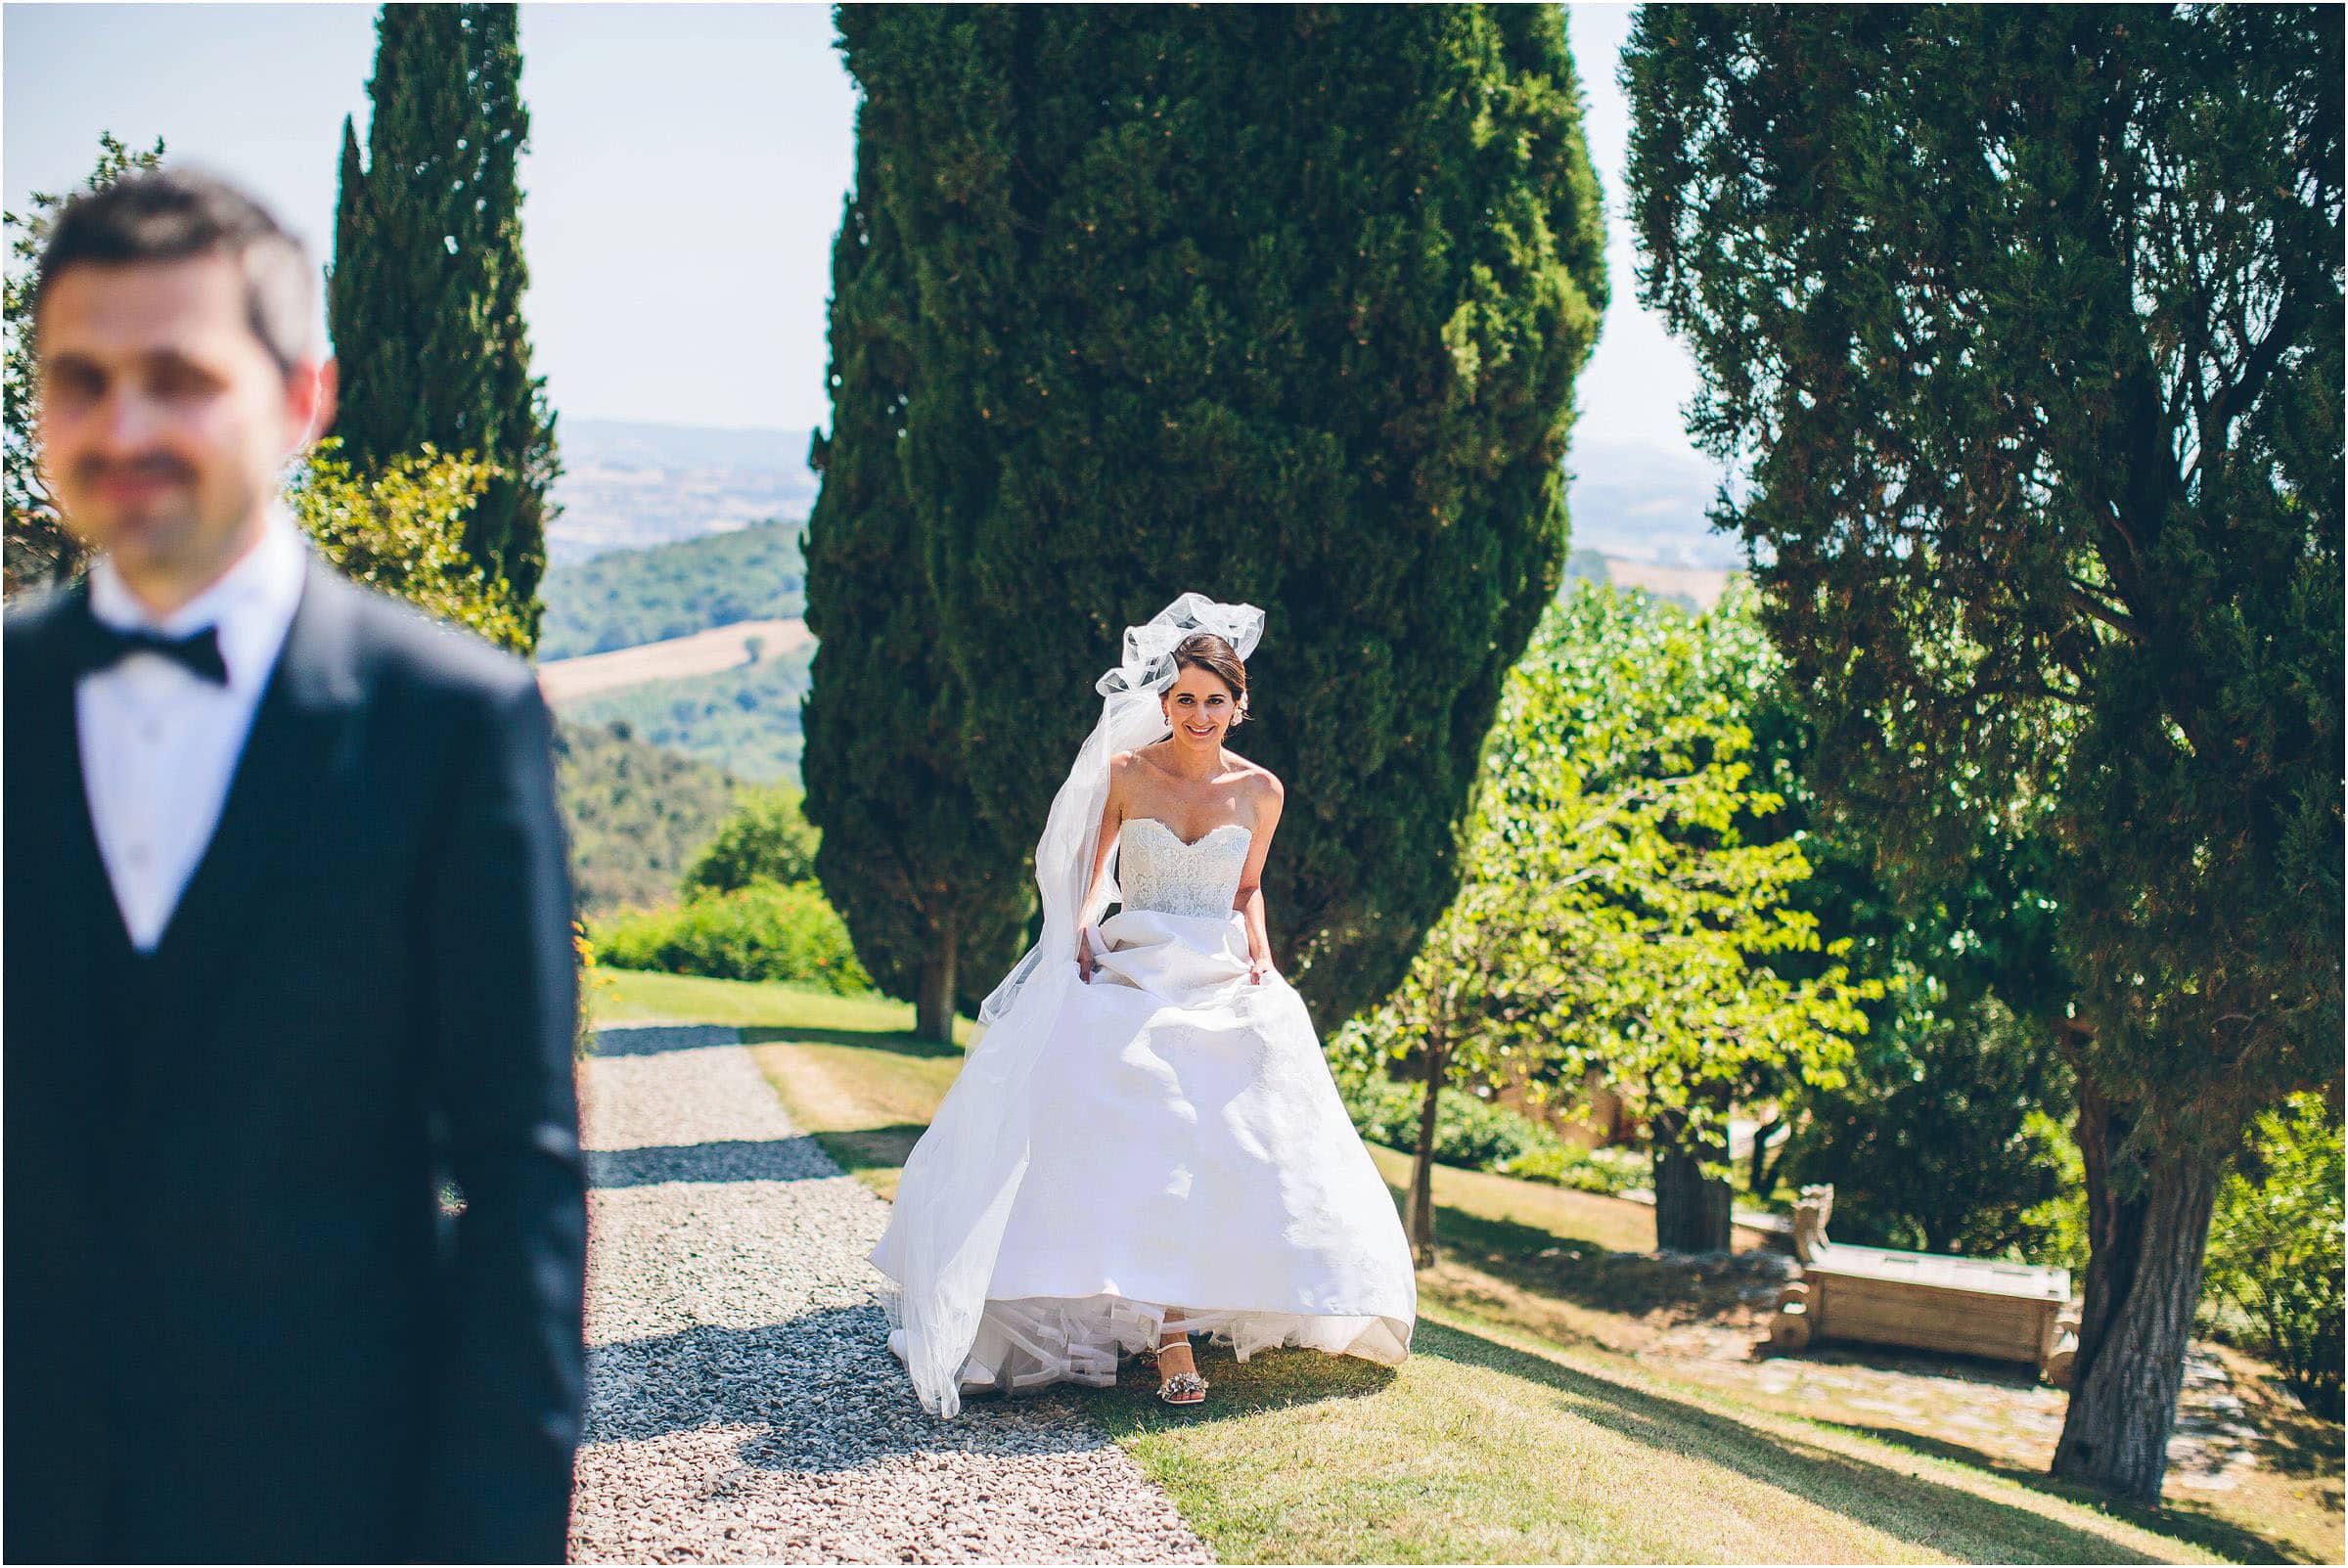 A wedding photo showing the bride approaching Castello di Vicarello in Tuscany in bright sunshine